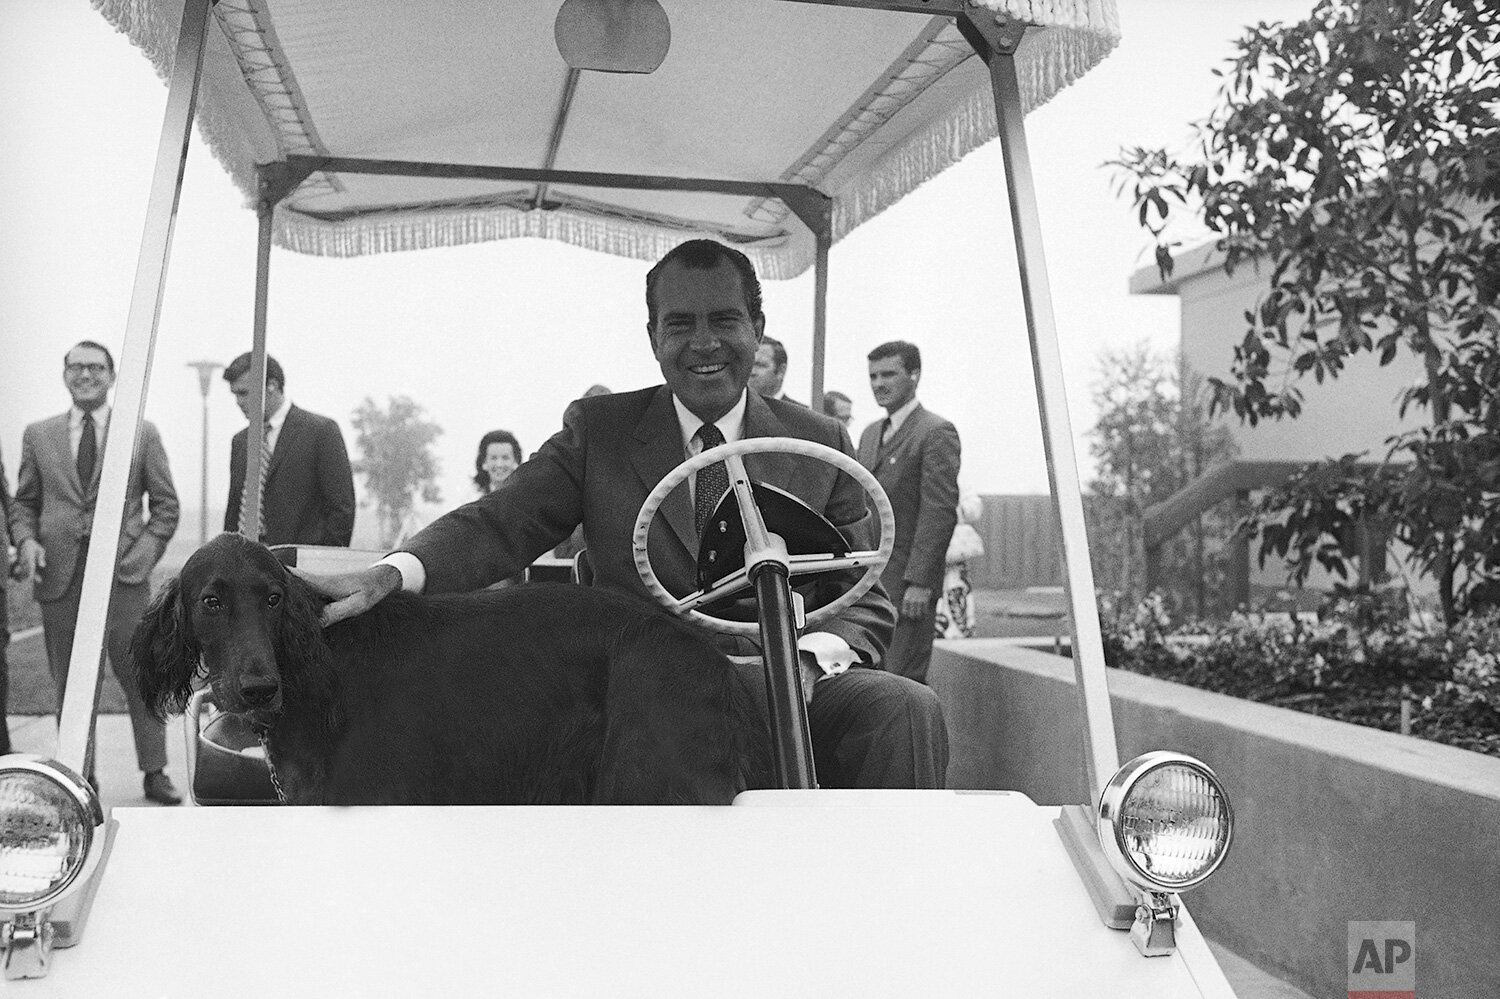  President Richard Nixon and his dog King Timahoe, arrive at the Western White House office in San Clemente after driving through a heavy fog in Nixon’s golf cart, Aug. 20, 1969.  (AP Photo) 